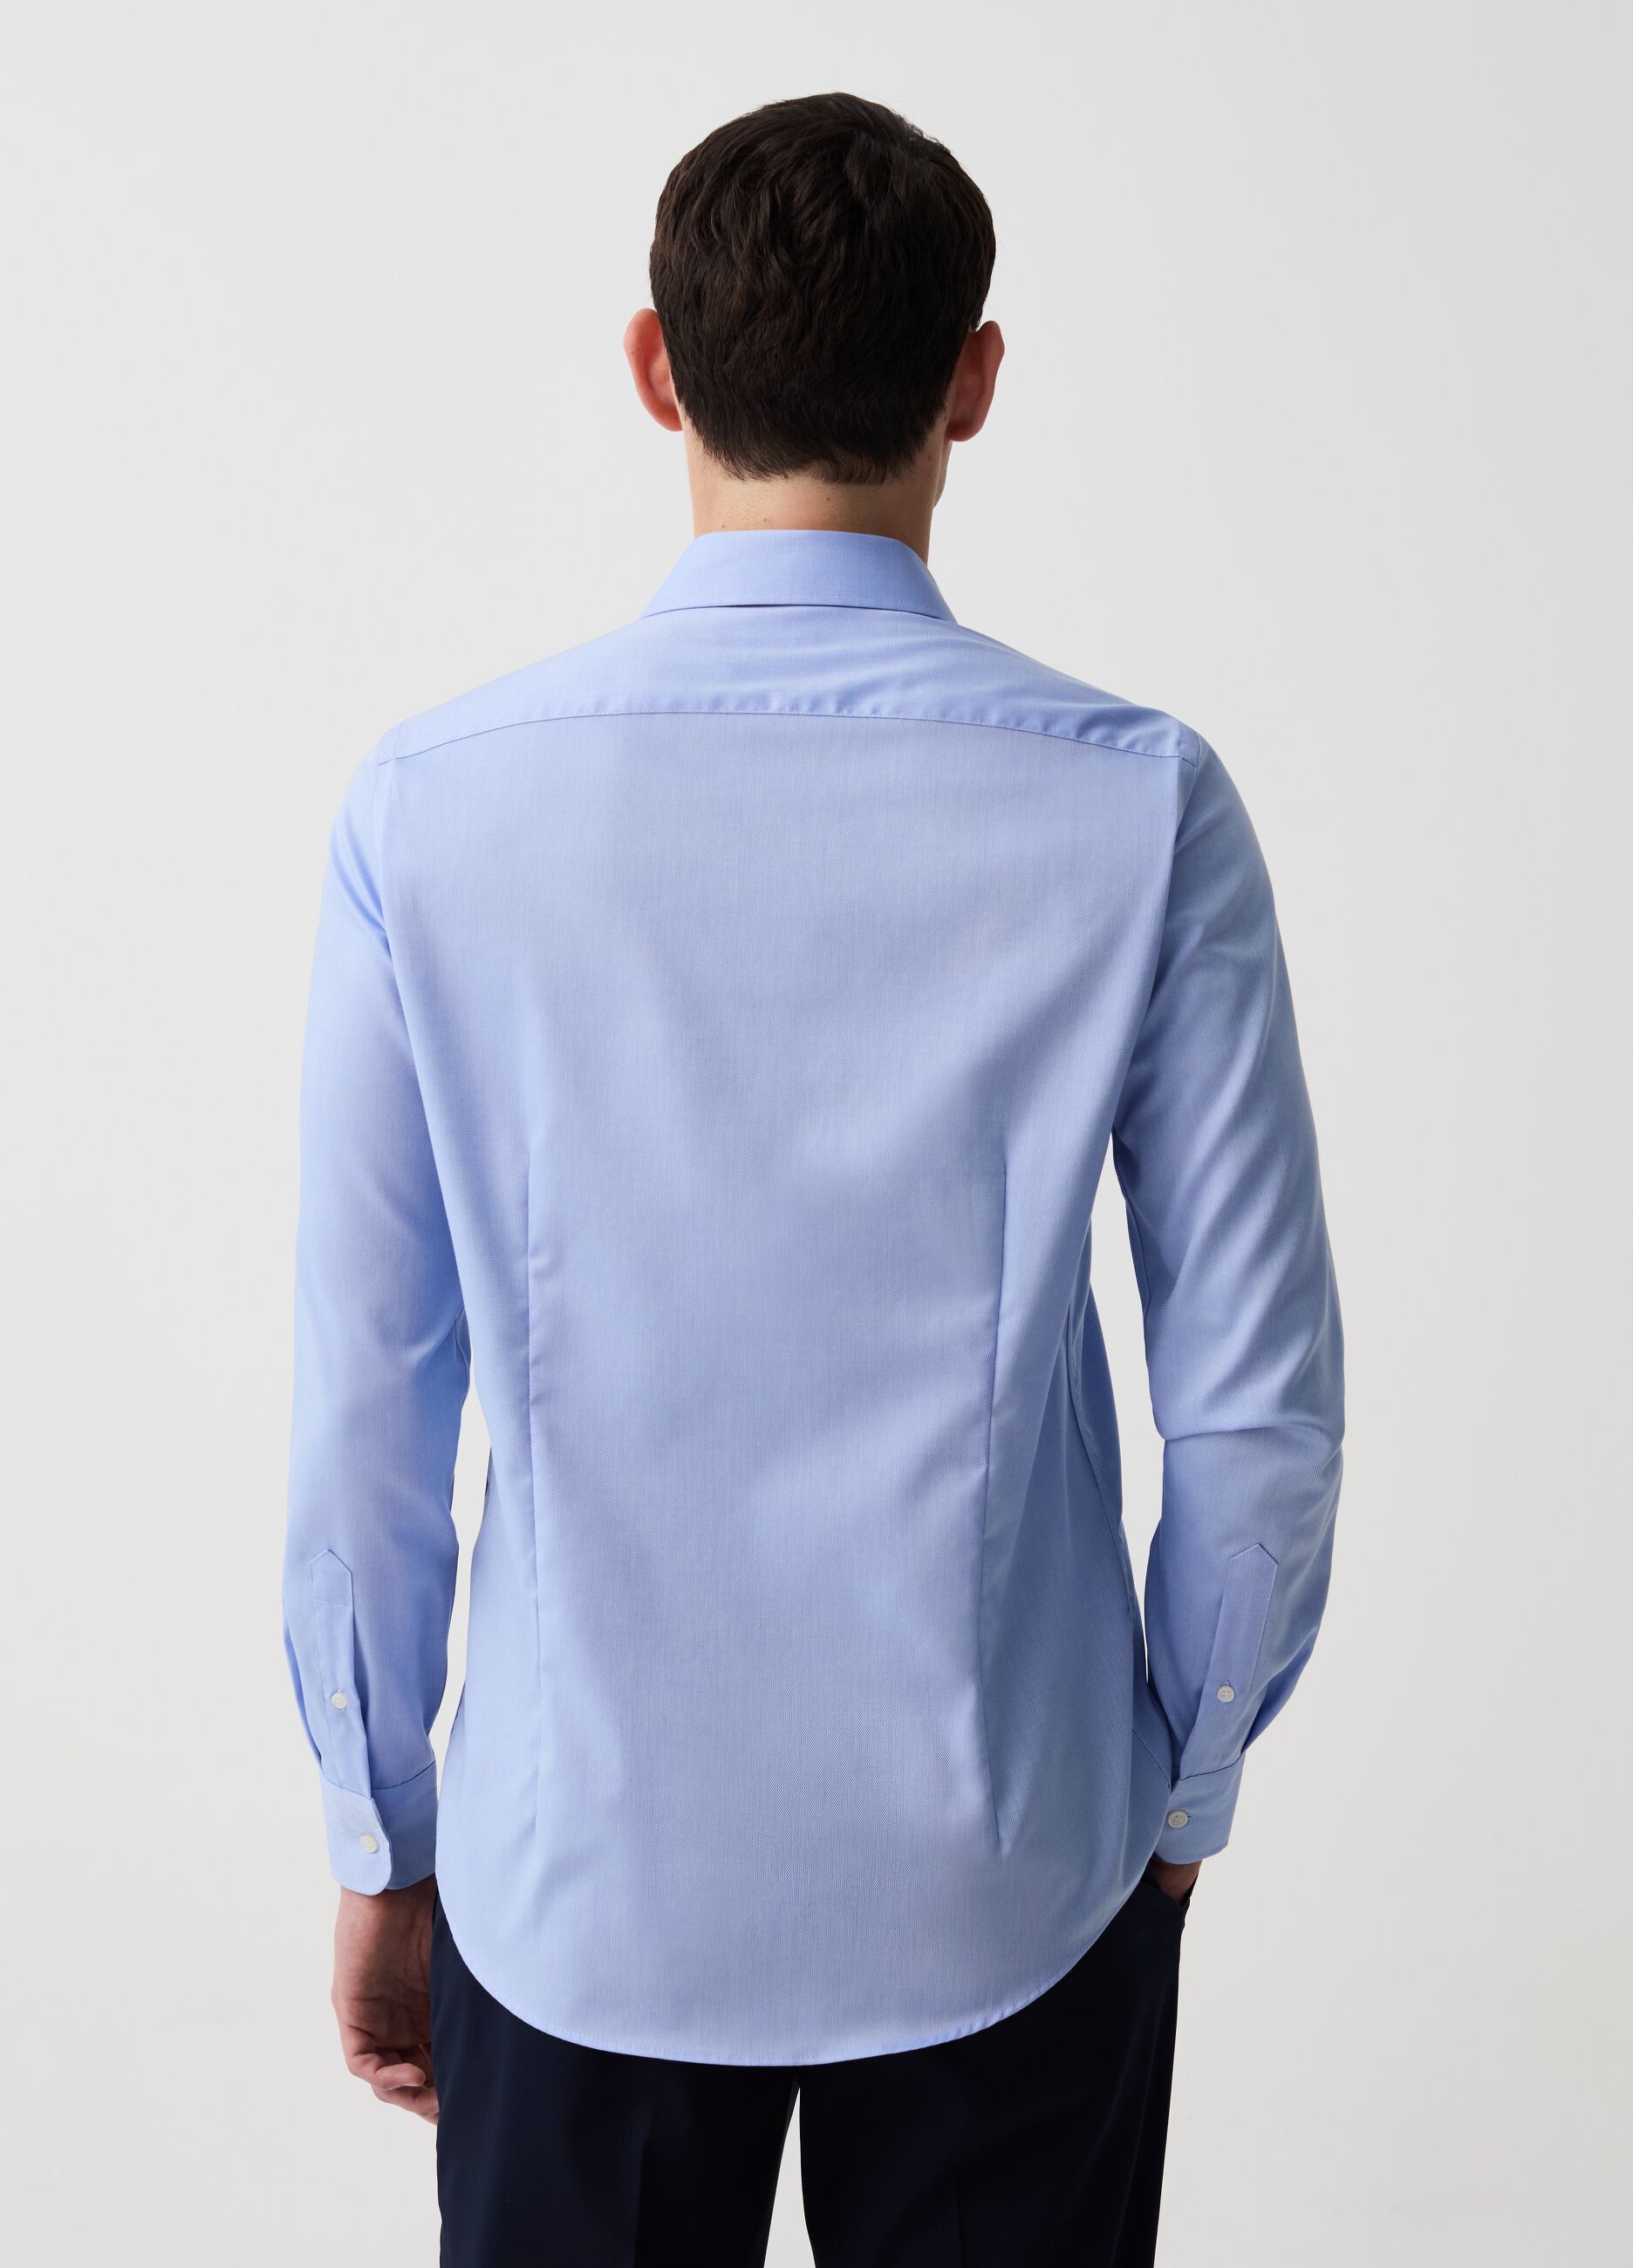 Slim-fit shirt in no-iron Oxford cotton